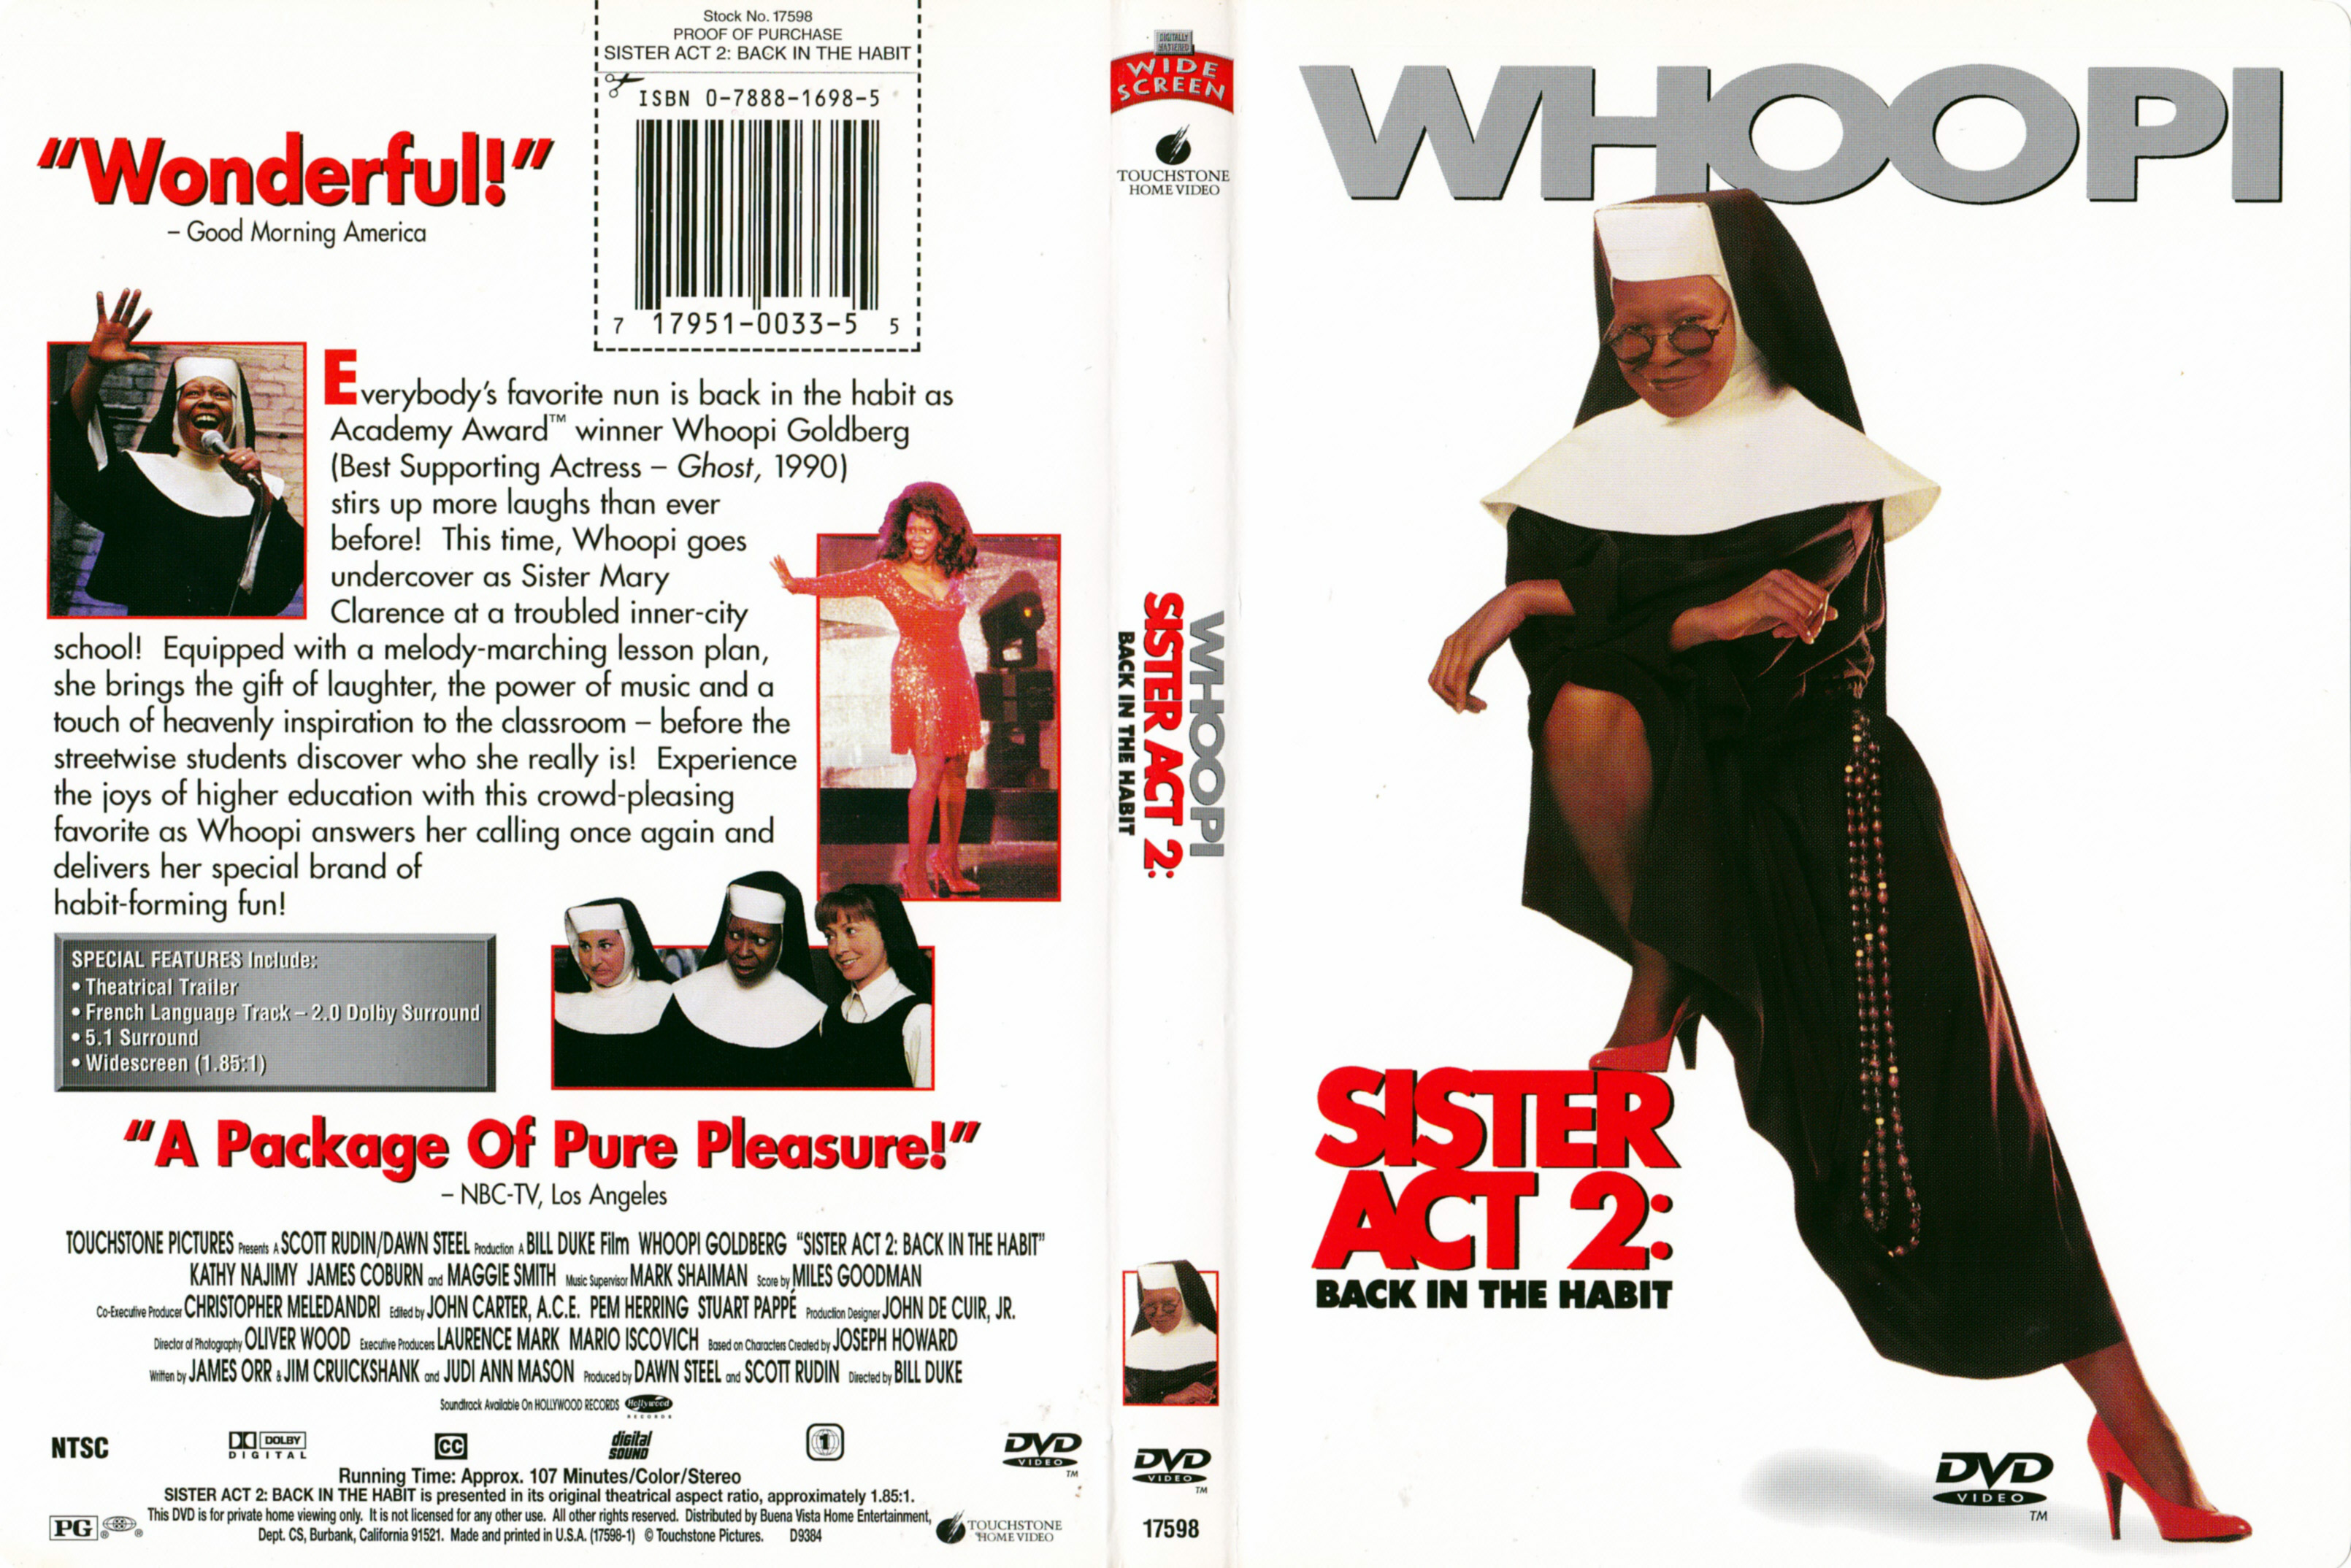 Jaquette DVD Sister act 2 - Back to the habit (Canadienne)